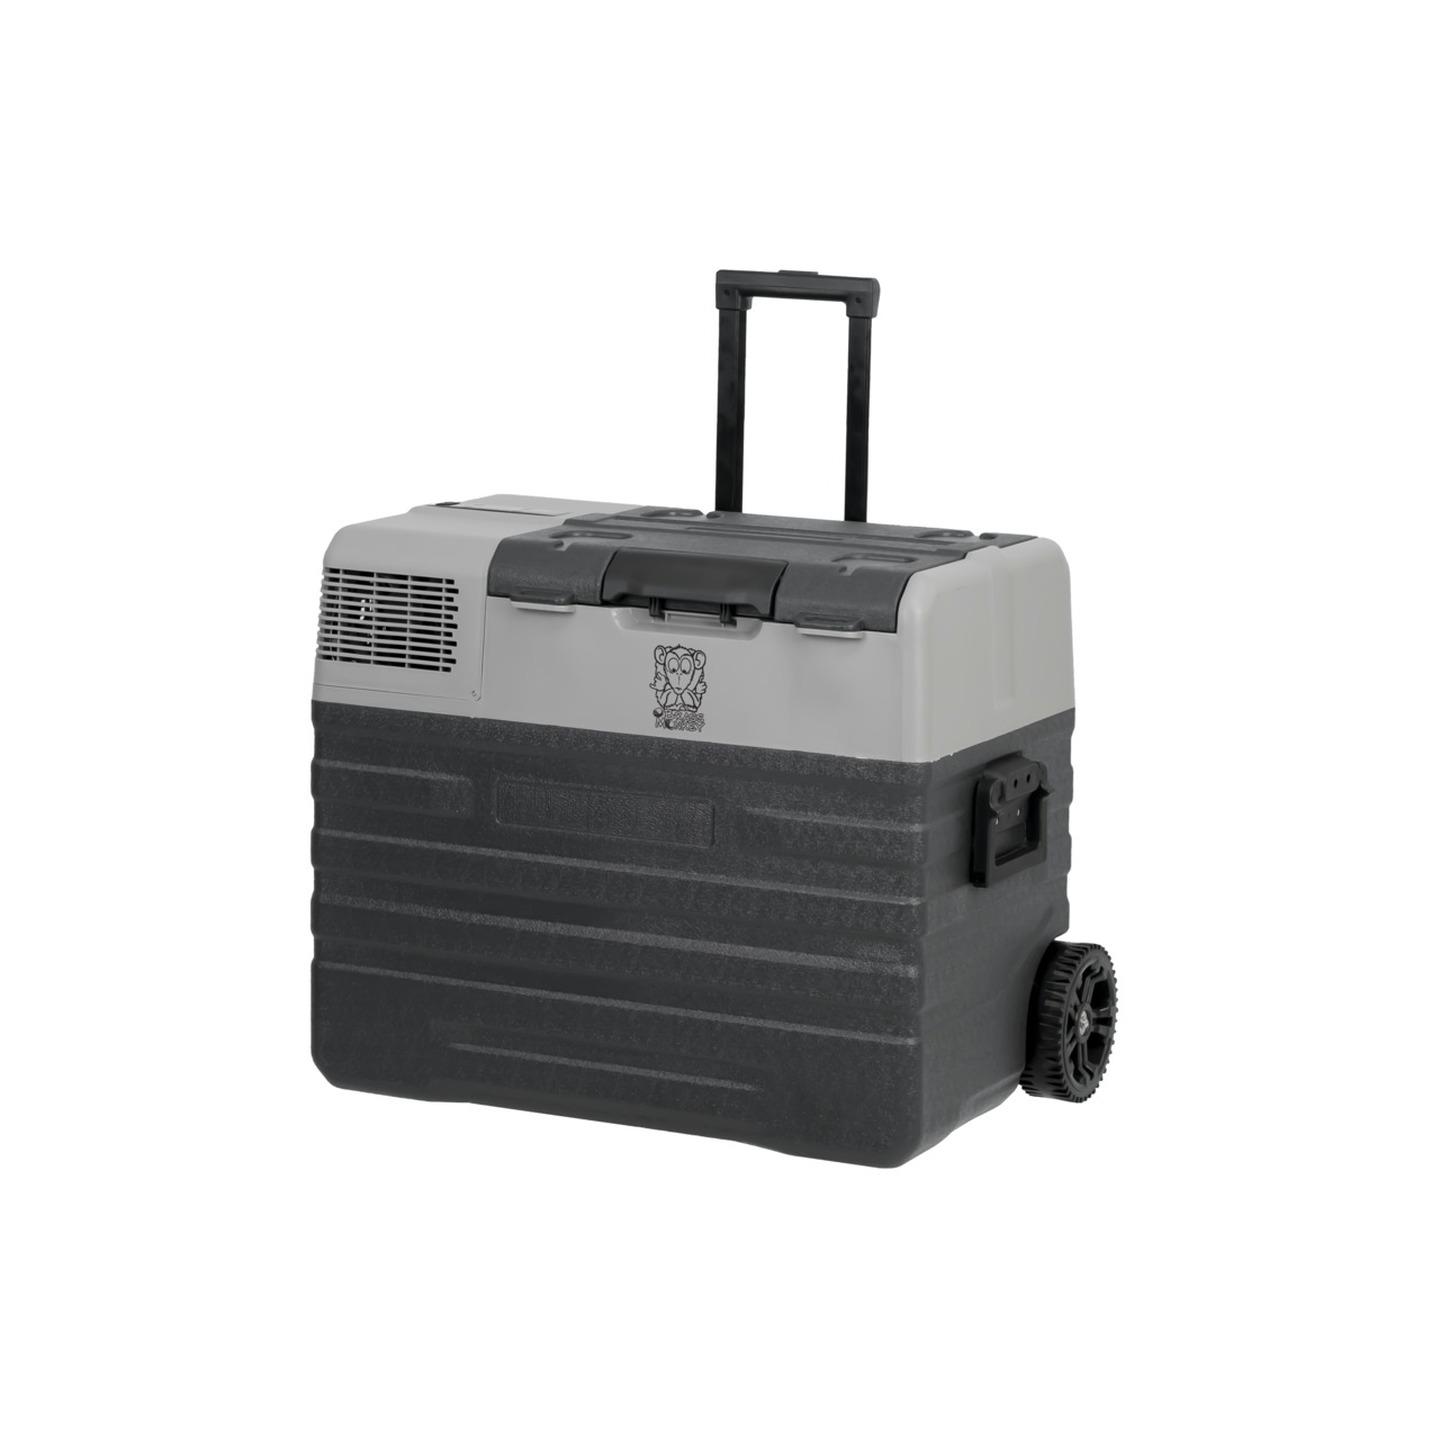 42L Brass Monkey Ultra-Portable Fridge/Freezer with Wheels and Battery Compartment